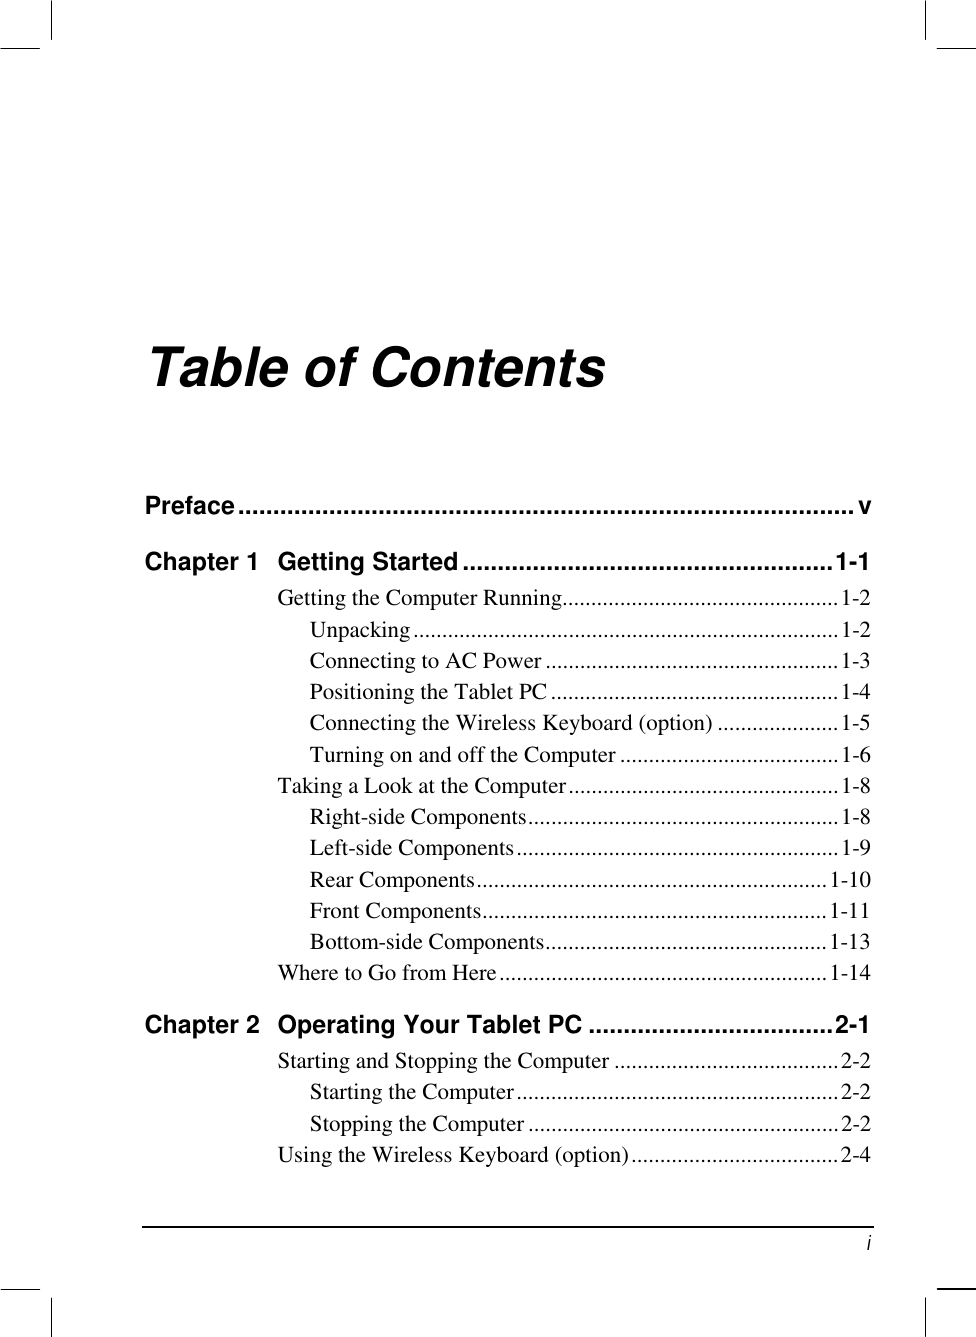   i Table of Contents Preface........................................................................................v Chapter 1  Getting Started.....................................................1-1 Getting the Computer Running................................................1-2 Unpacking..........................................................................1-2 Connecting to AC Power ...................................................1-3 Positioning the Tablet PC..................................................1-4 Connecting the Wireless Keyboard (option) .....................1-5 Turning on and off the Computer ......................................1-6 Taking a Look at the Computer...............................................1-8 Right-side Components......................................................1-8 Left-side Components........................................................1-9 Rear Components.............................................................1-10 Front Components............................................................1-11 Bottom-side Components.................................................1-13 Where to Go from Here.........................................................1-14 Chapter 2  Operating Your Tablet PC ...................................2-1 Starting and Stopping the Computer .......................................2-2 Starting the Computer........................................................2-2 Stopping the Computer ......................................................2-2 Using the Wireless Keyboard (option)....................................2-4 